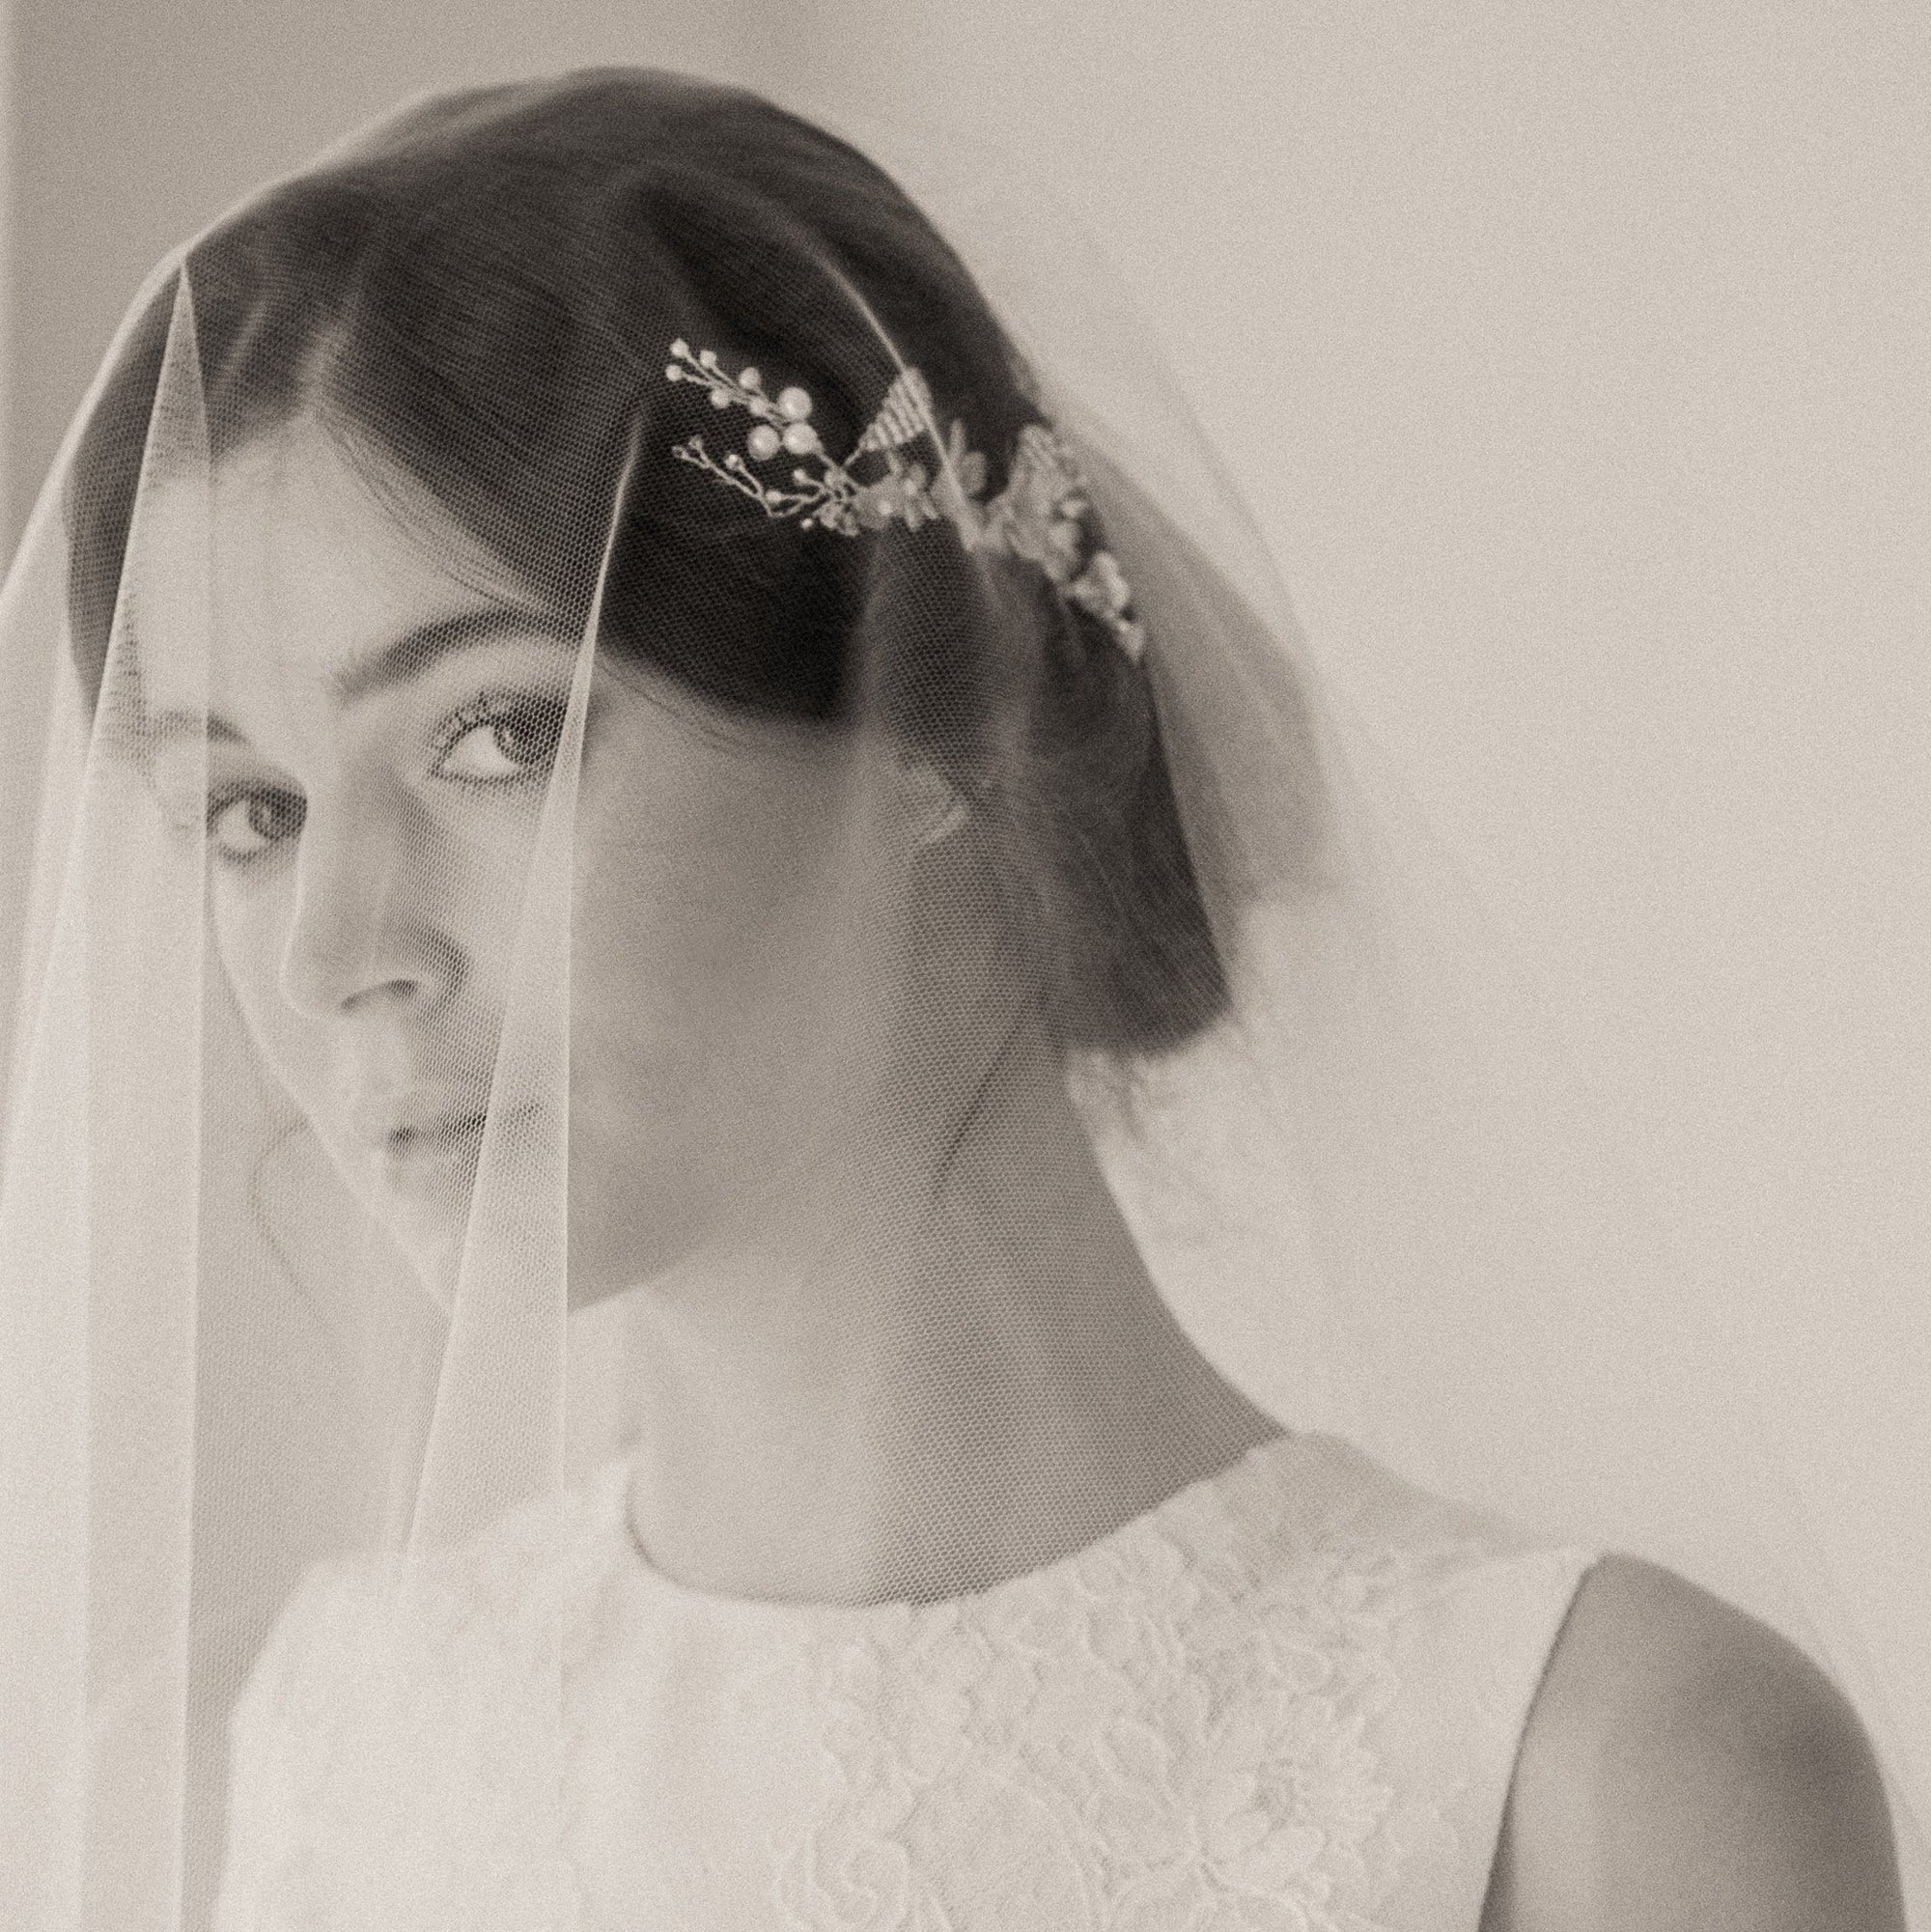 Top tips for Securing your Wedding Veil with Short Hair